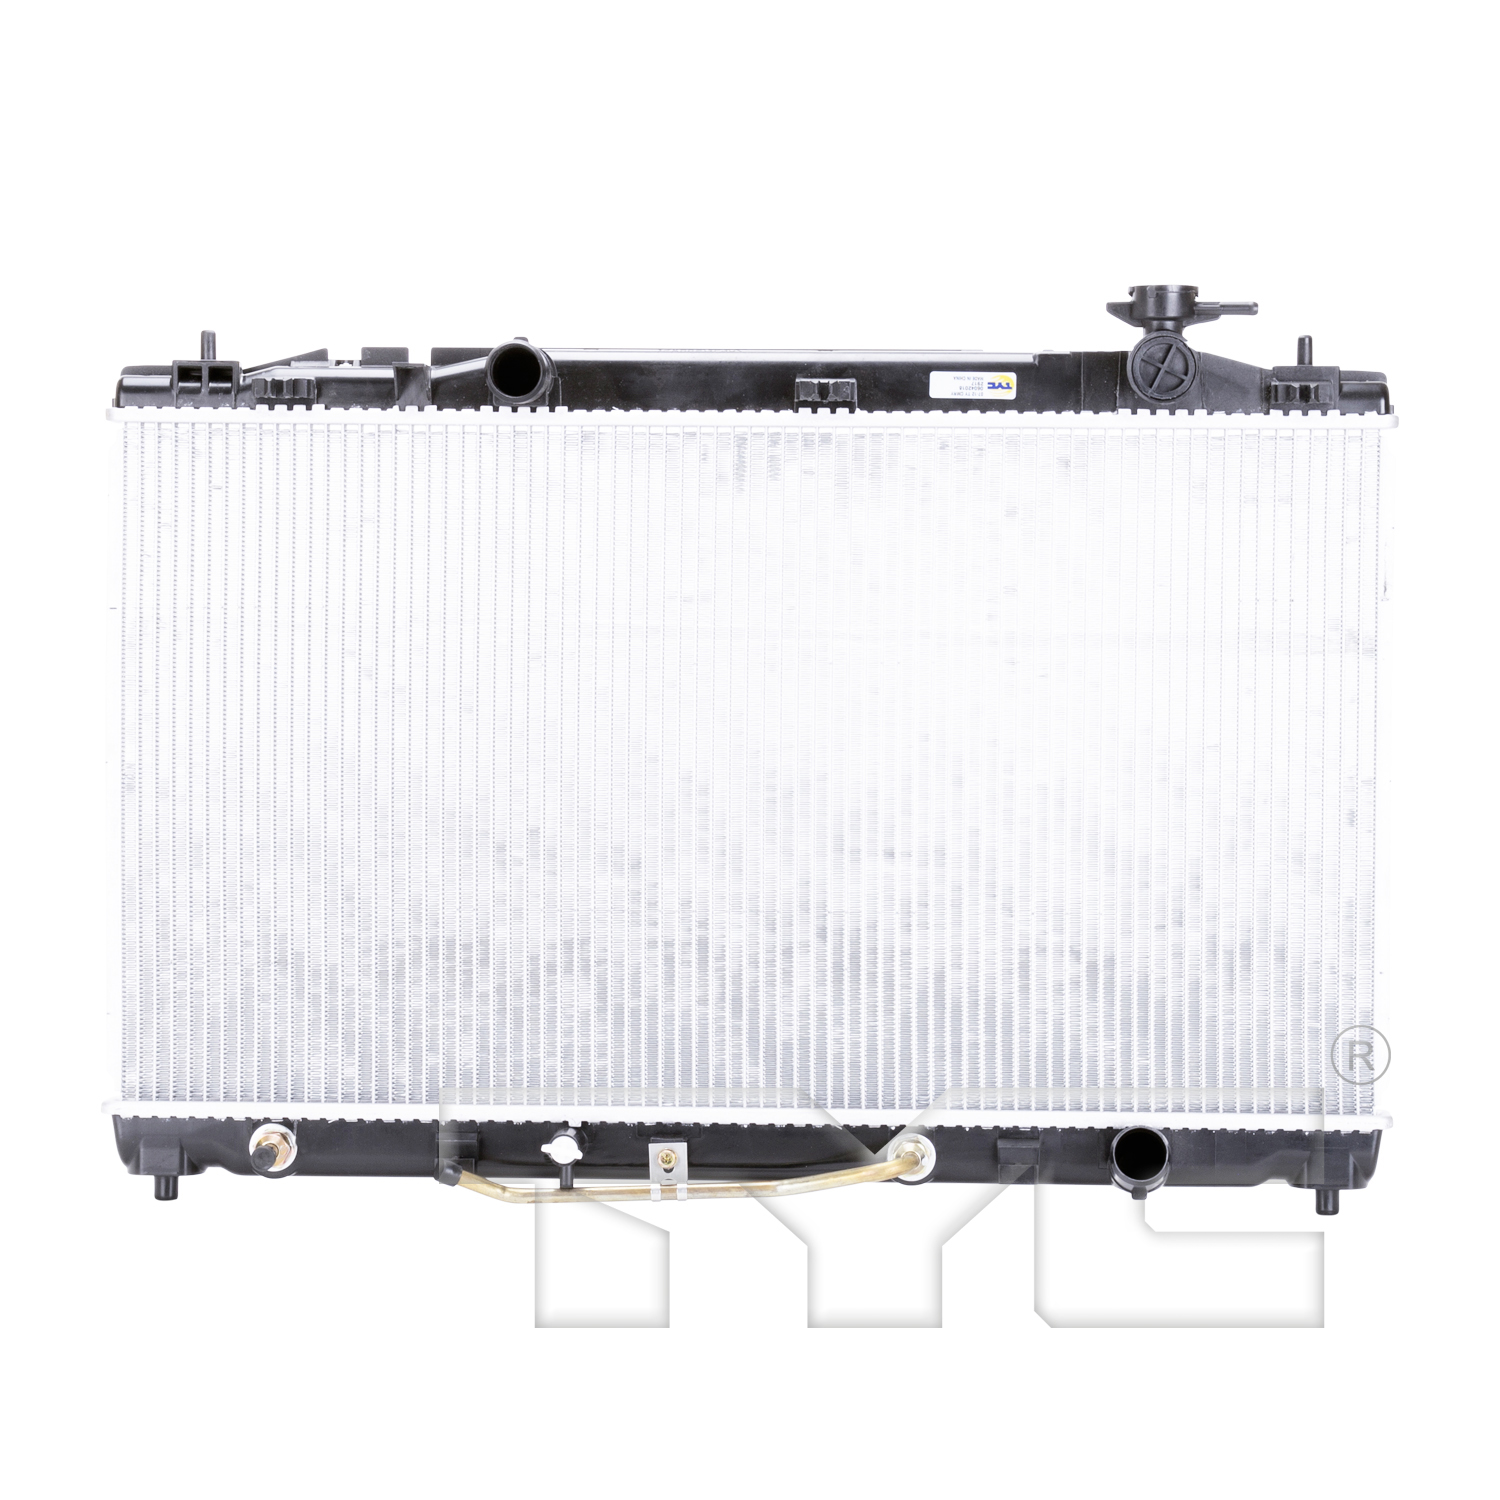 Aftermarket RADIATORS for TOYOTA - CAMRY, CAMRY,07-09,Radiator assembly